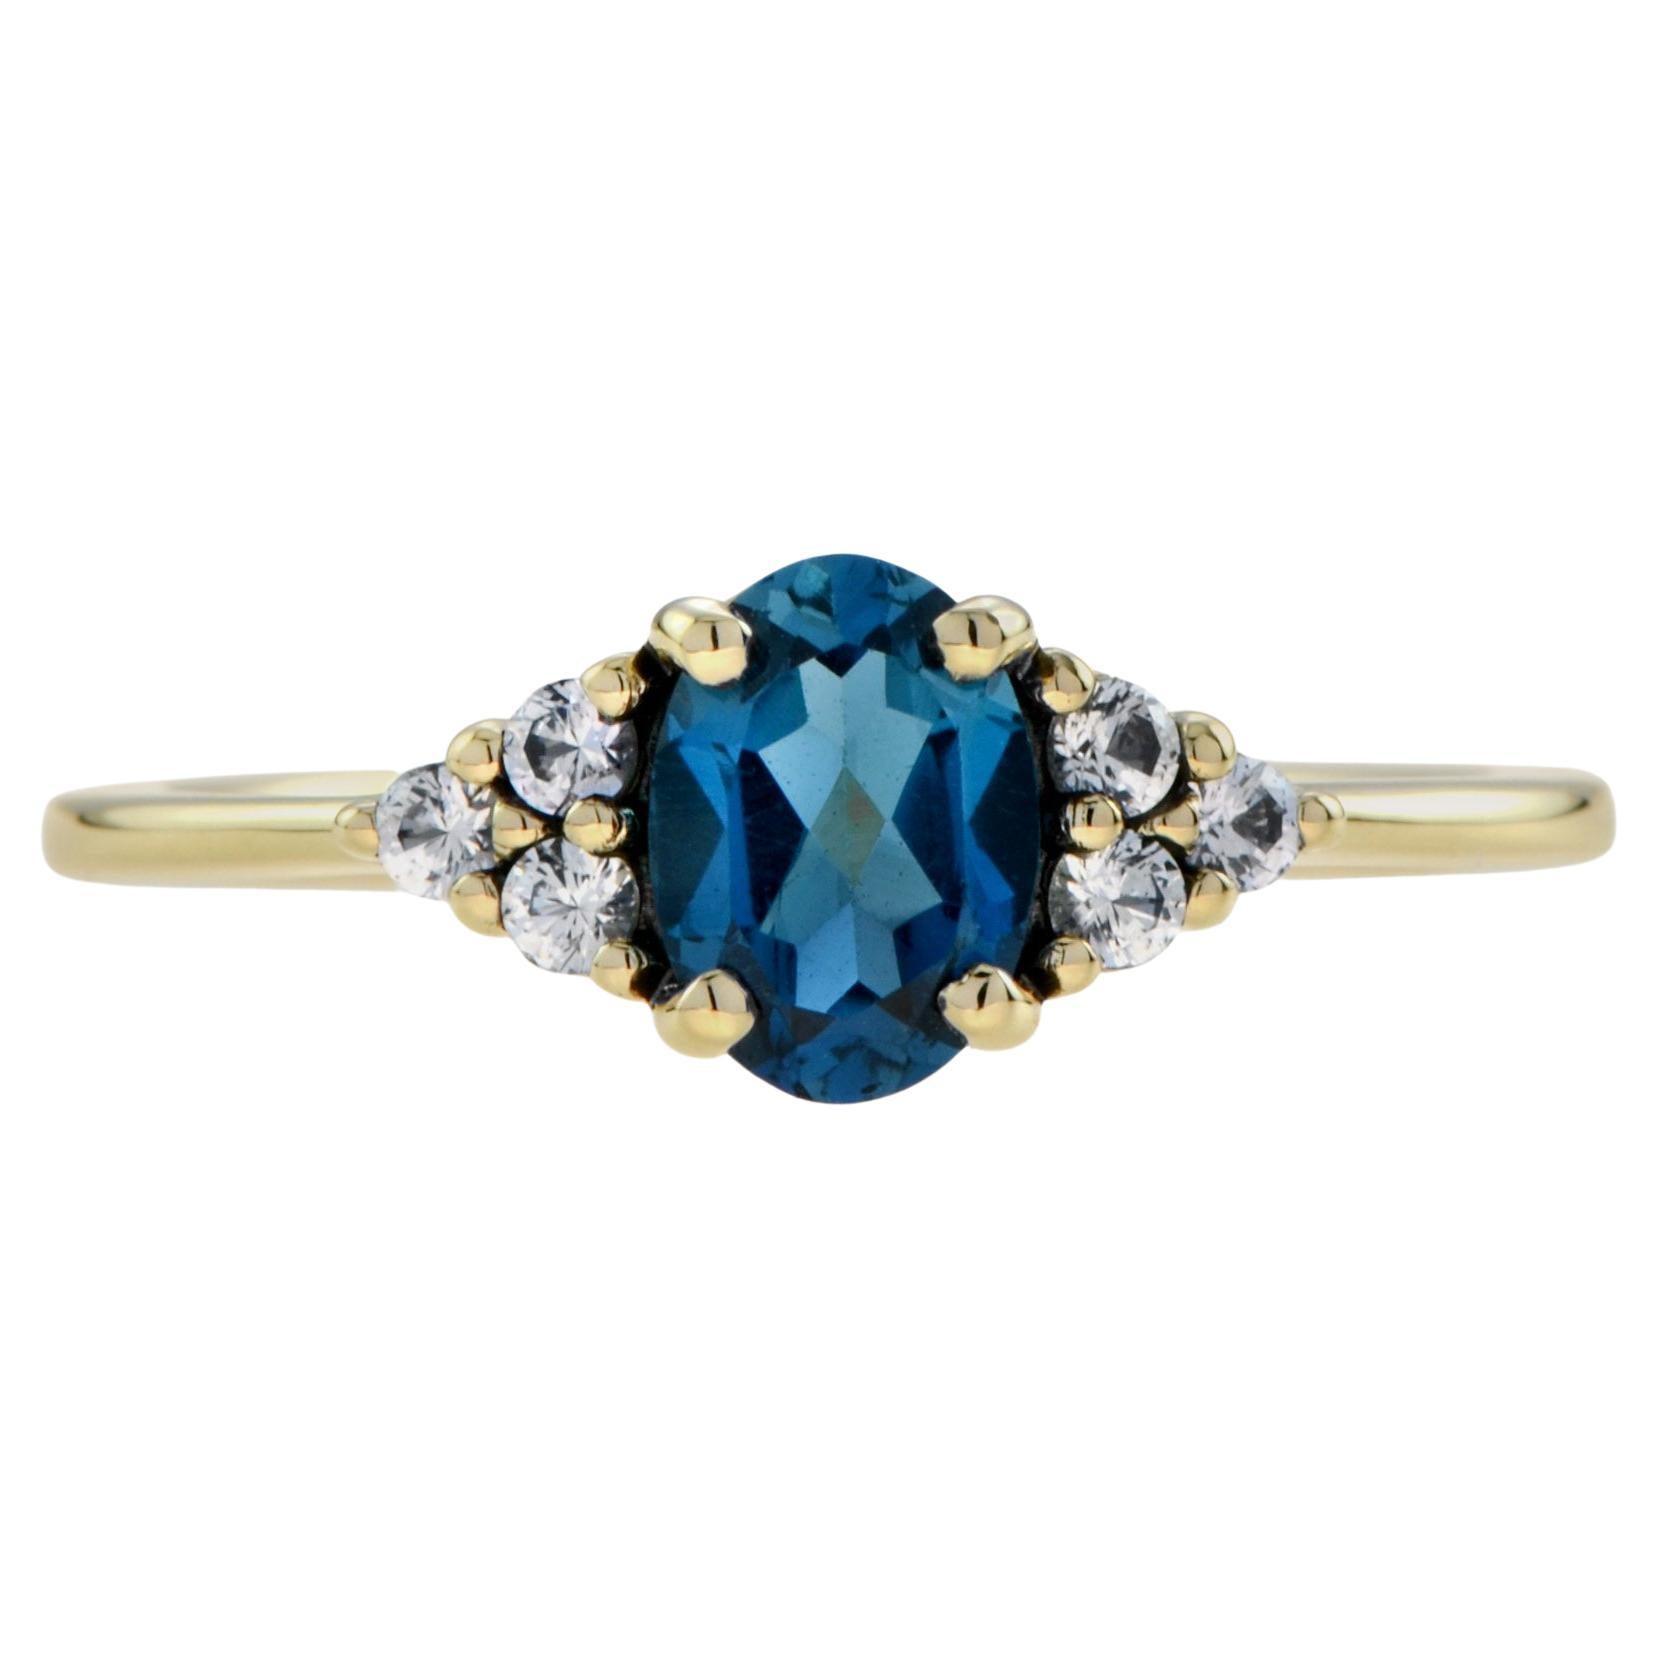 London Blue Topaz and White Sapphire Vintage Style Solitaire Ring in 9K Gold